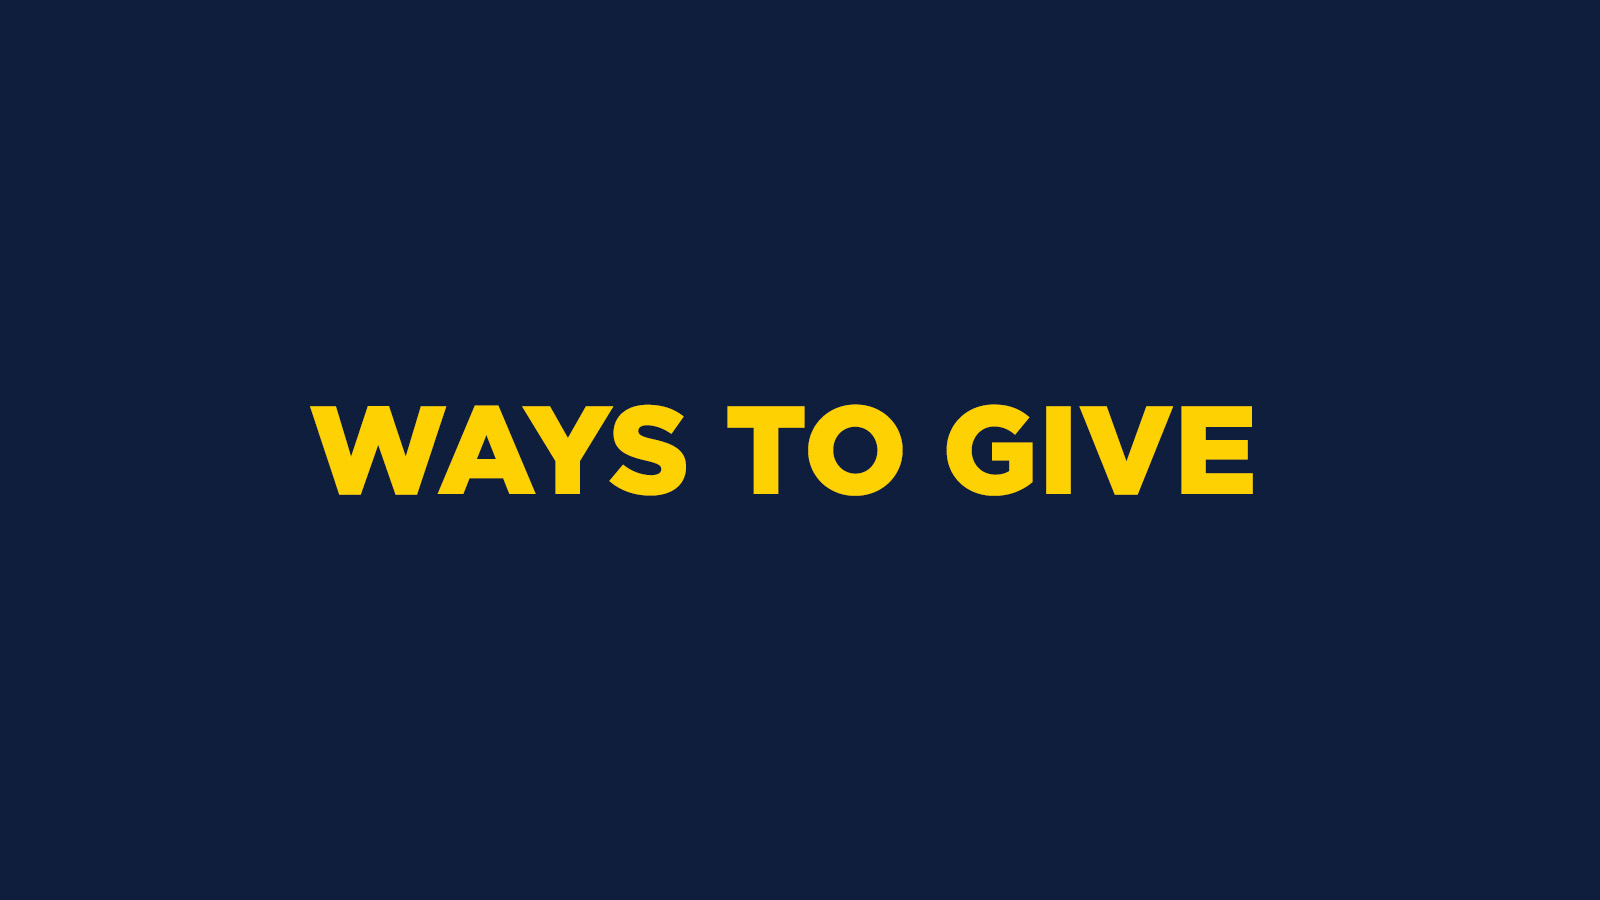 WAYS TO GIVE